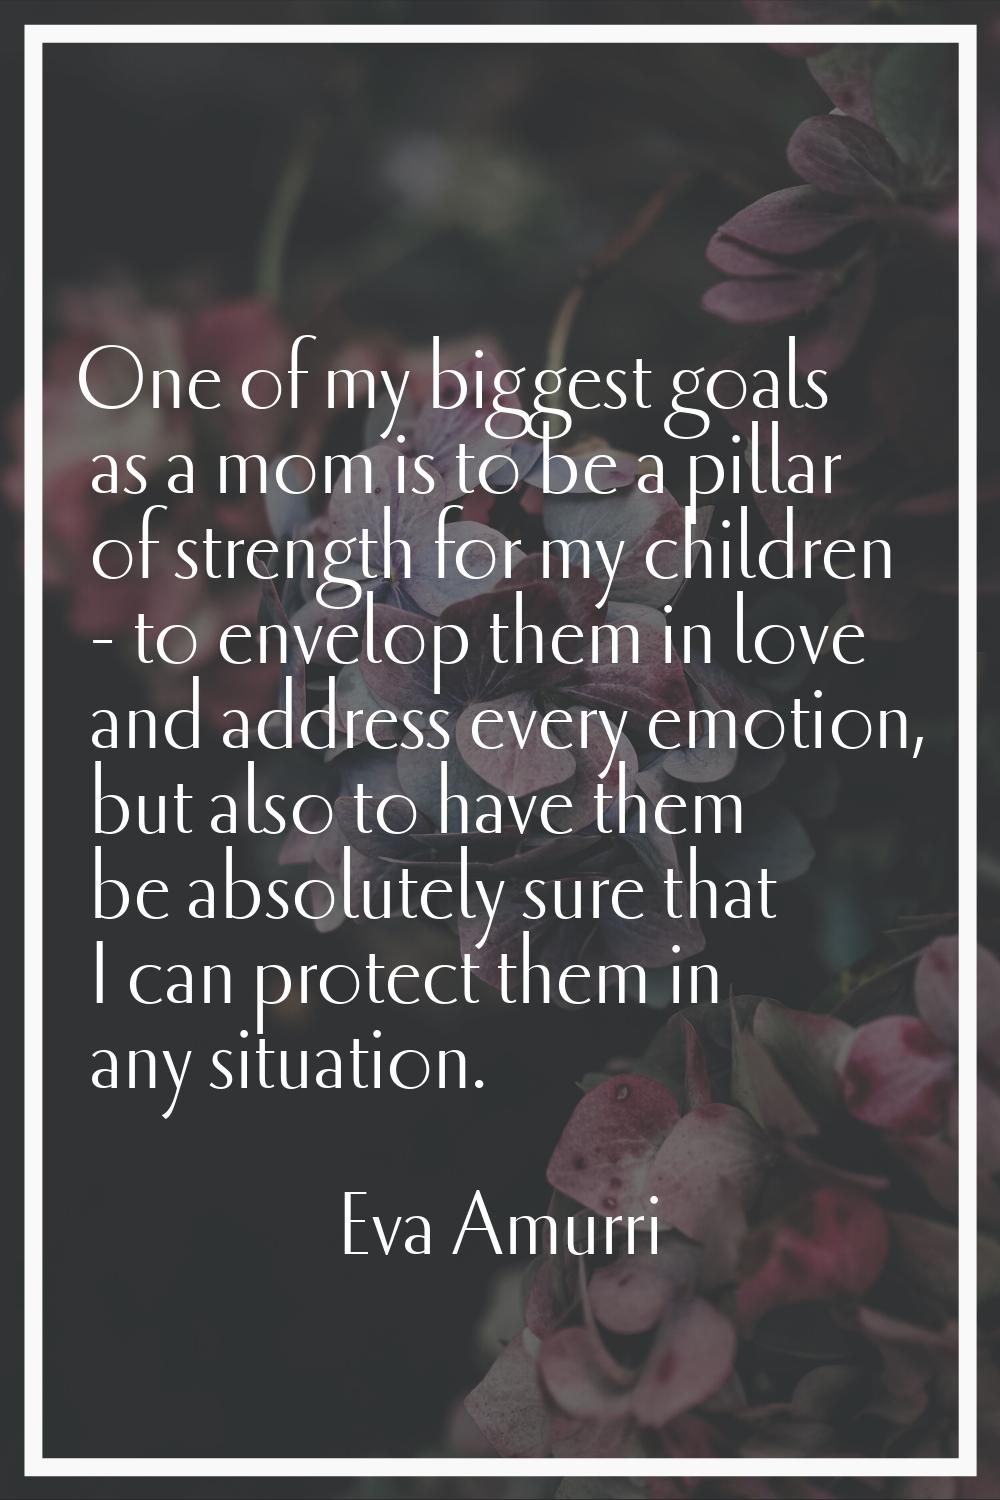 One of my biggest goals as a mom is to be a pillar of strength for my children - to envelop them in